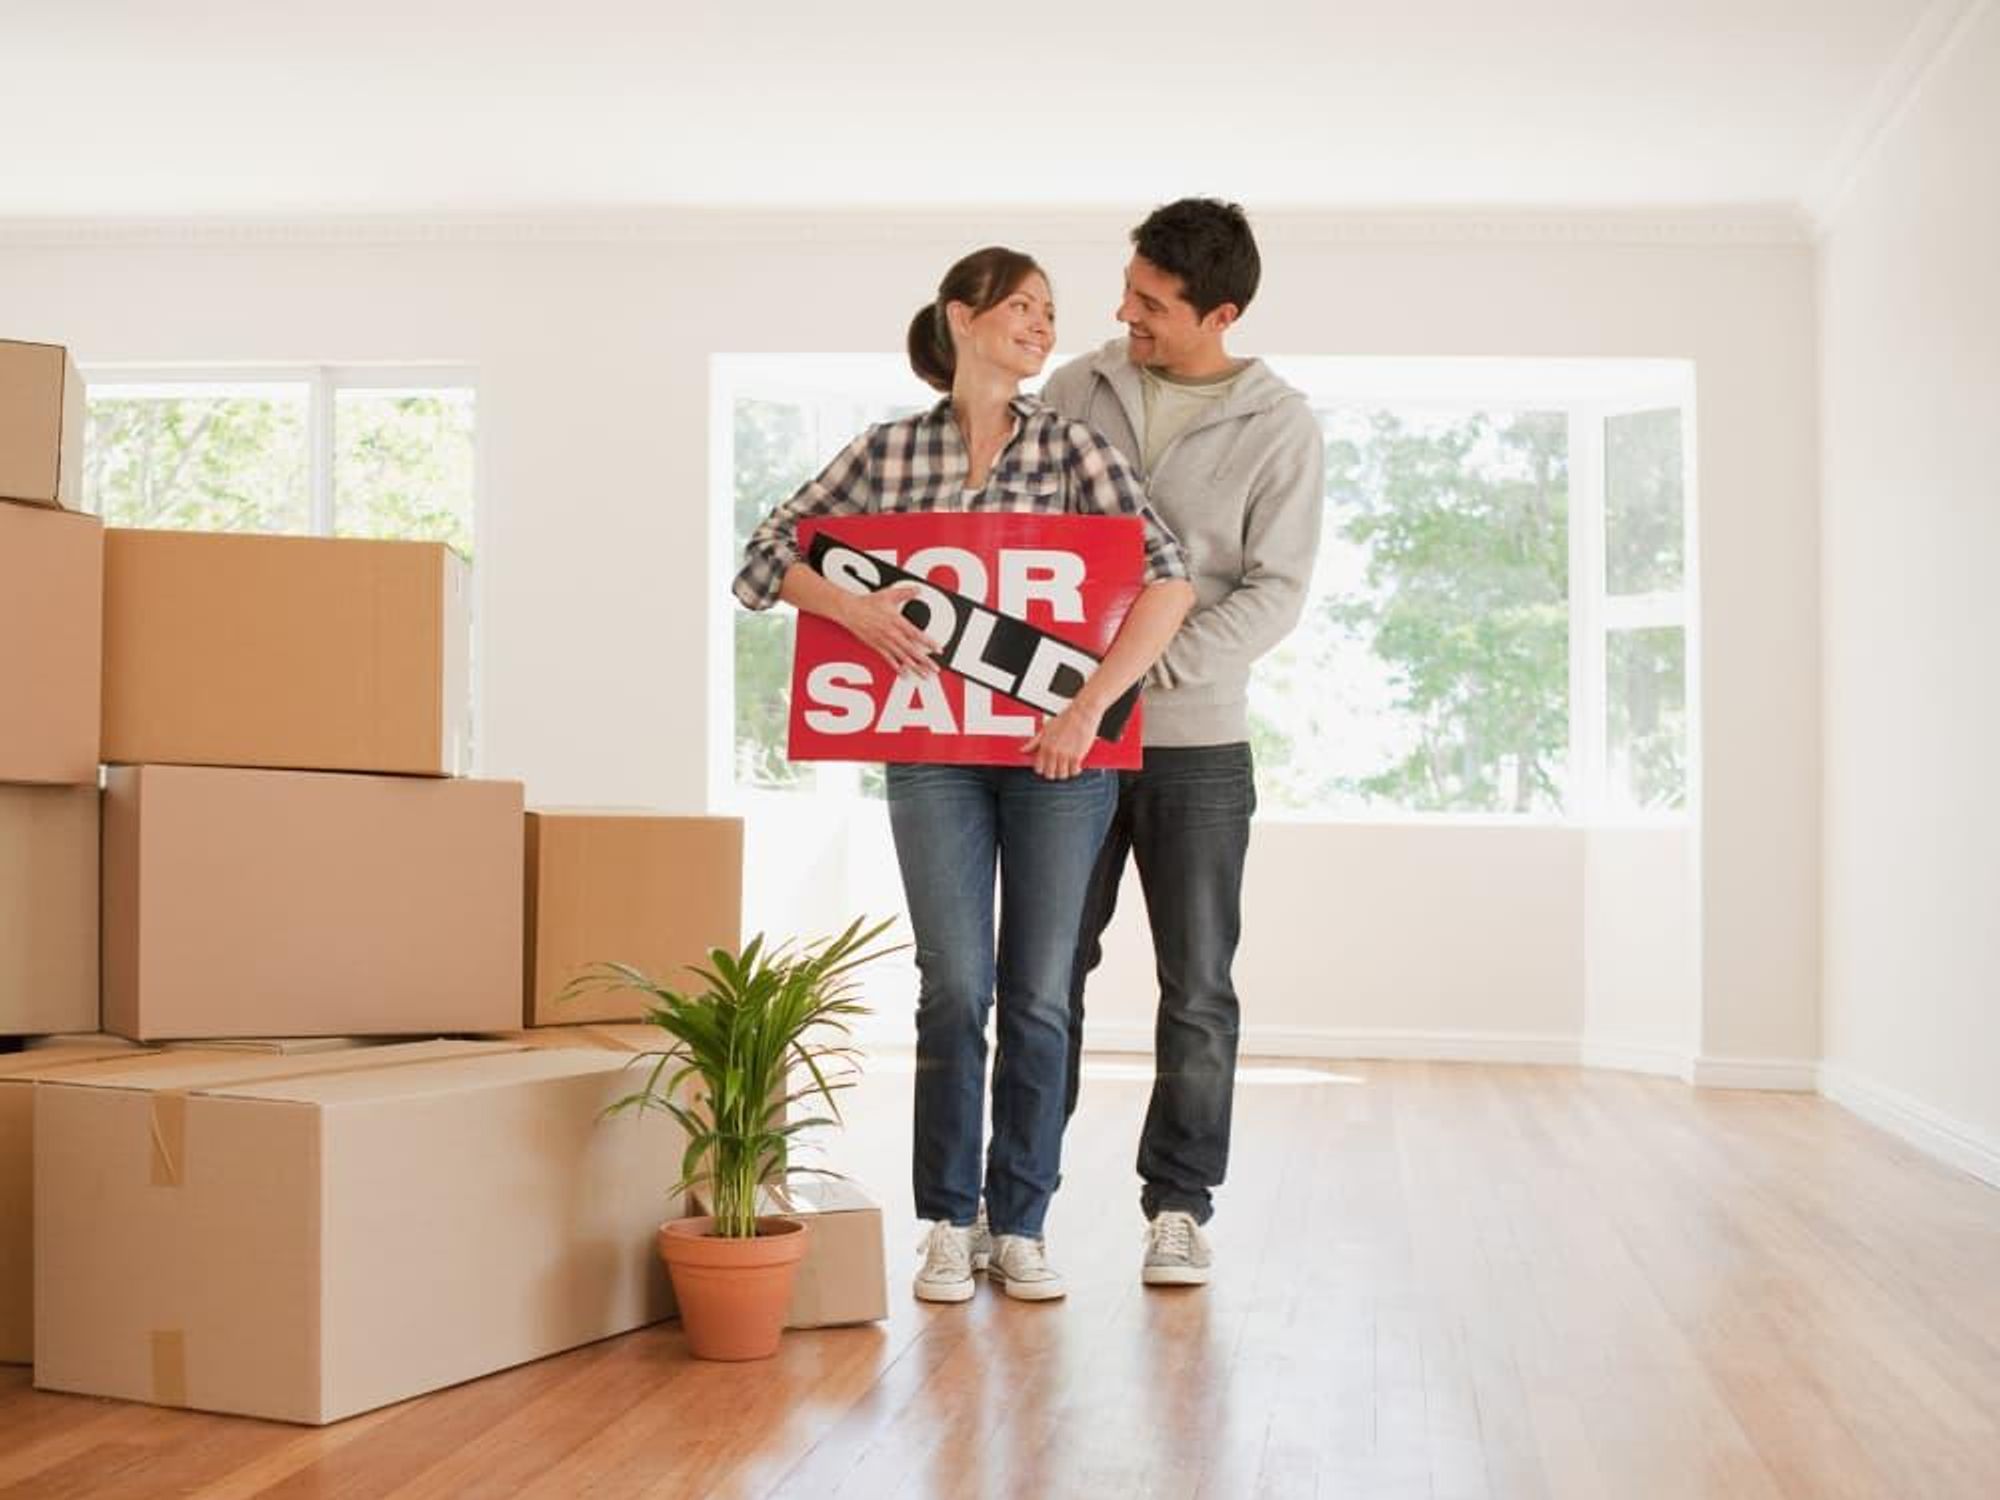 Couple with moving boxes and sold sign